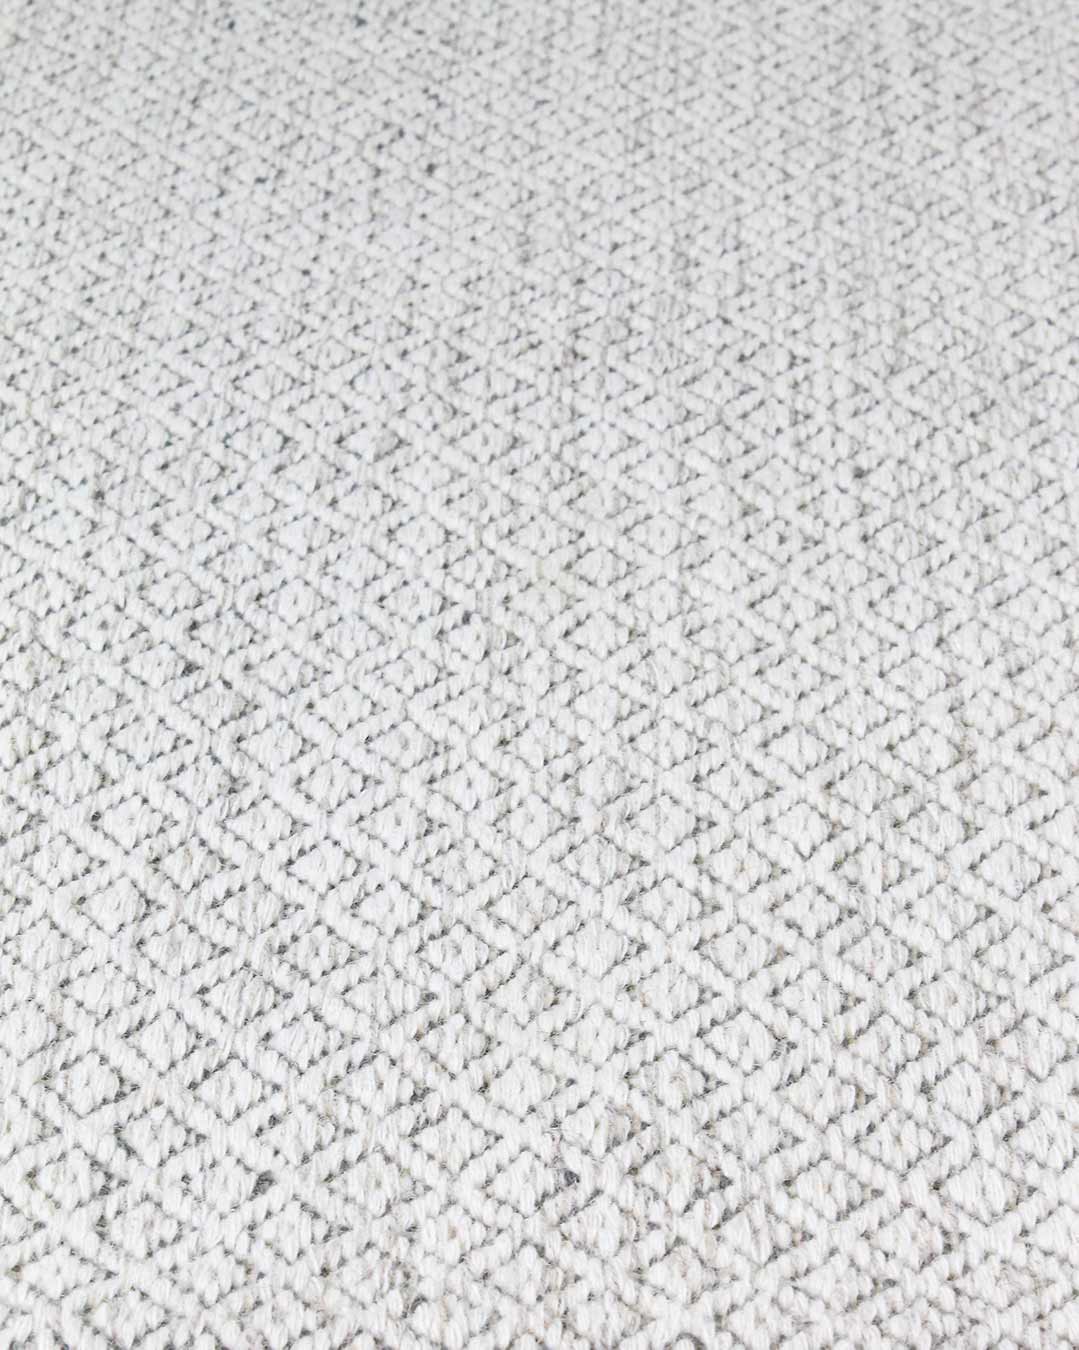 Detailed image of textured Plait Pastille rug in ivory colour